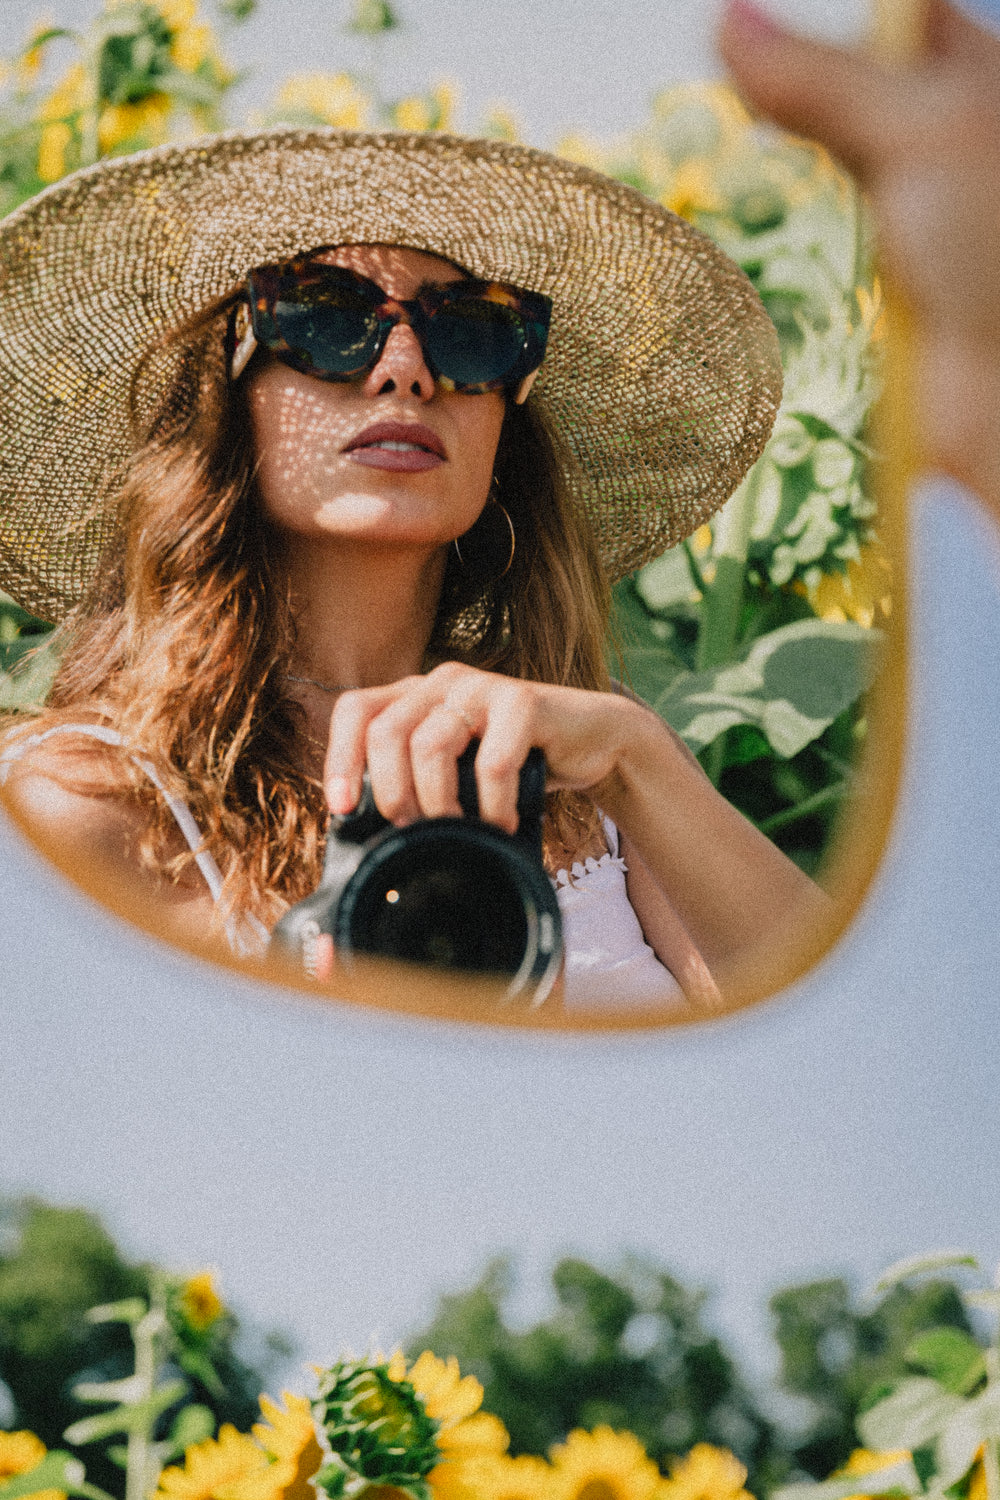 woman takes a mirror self portrait among sunflowers